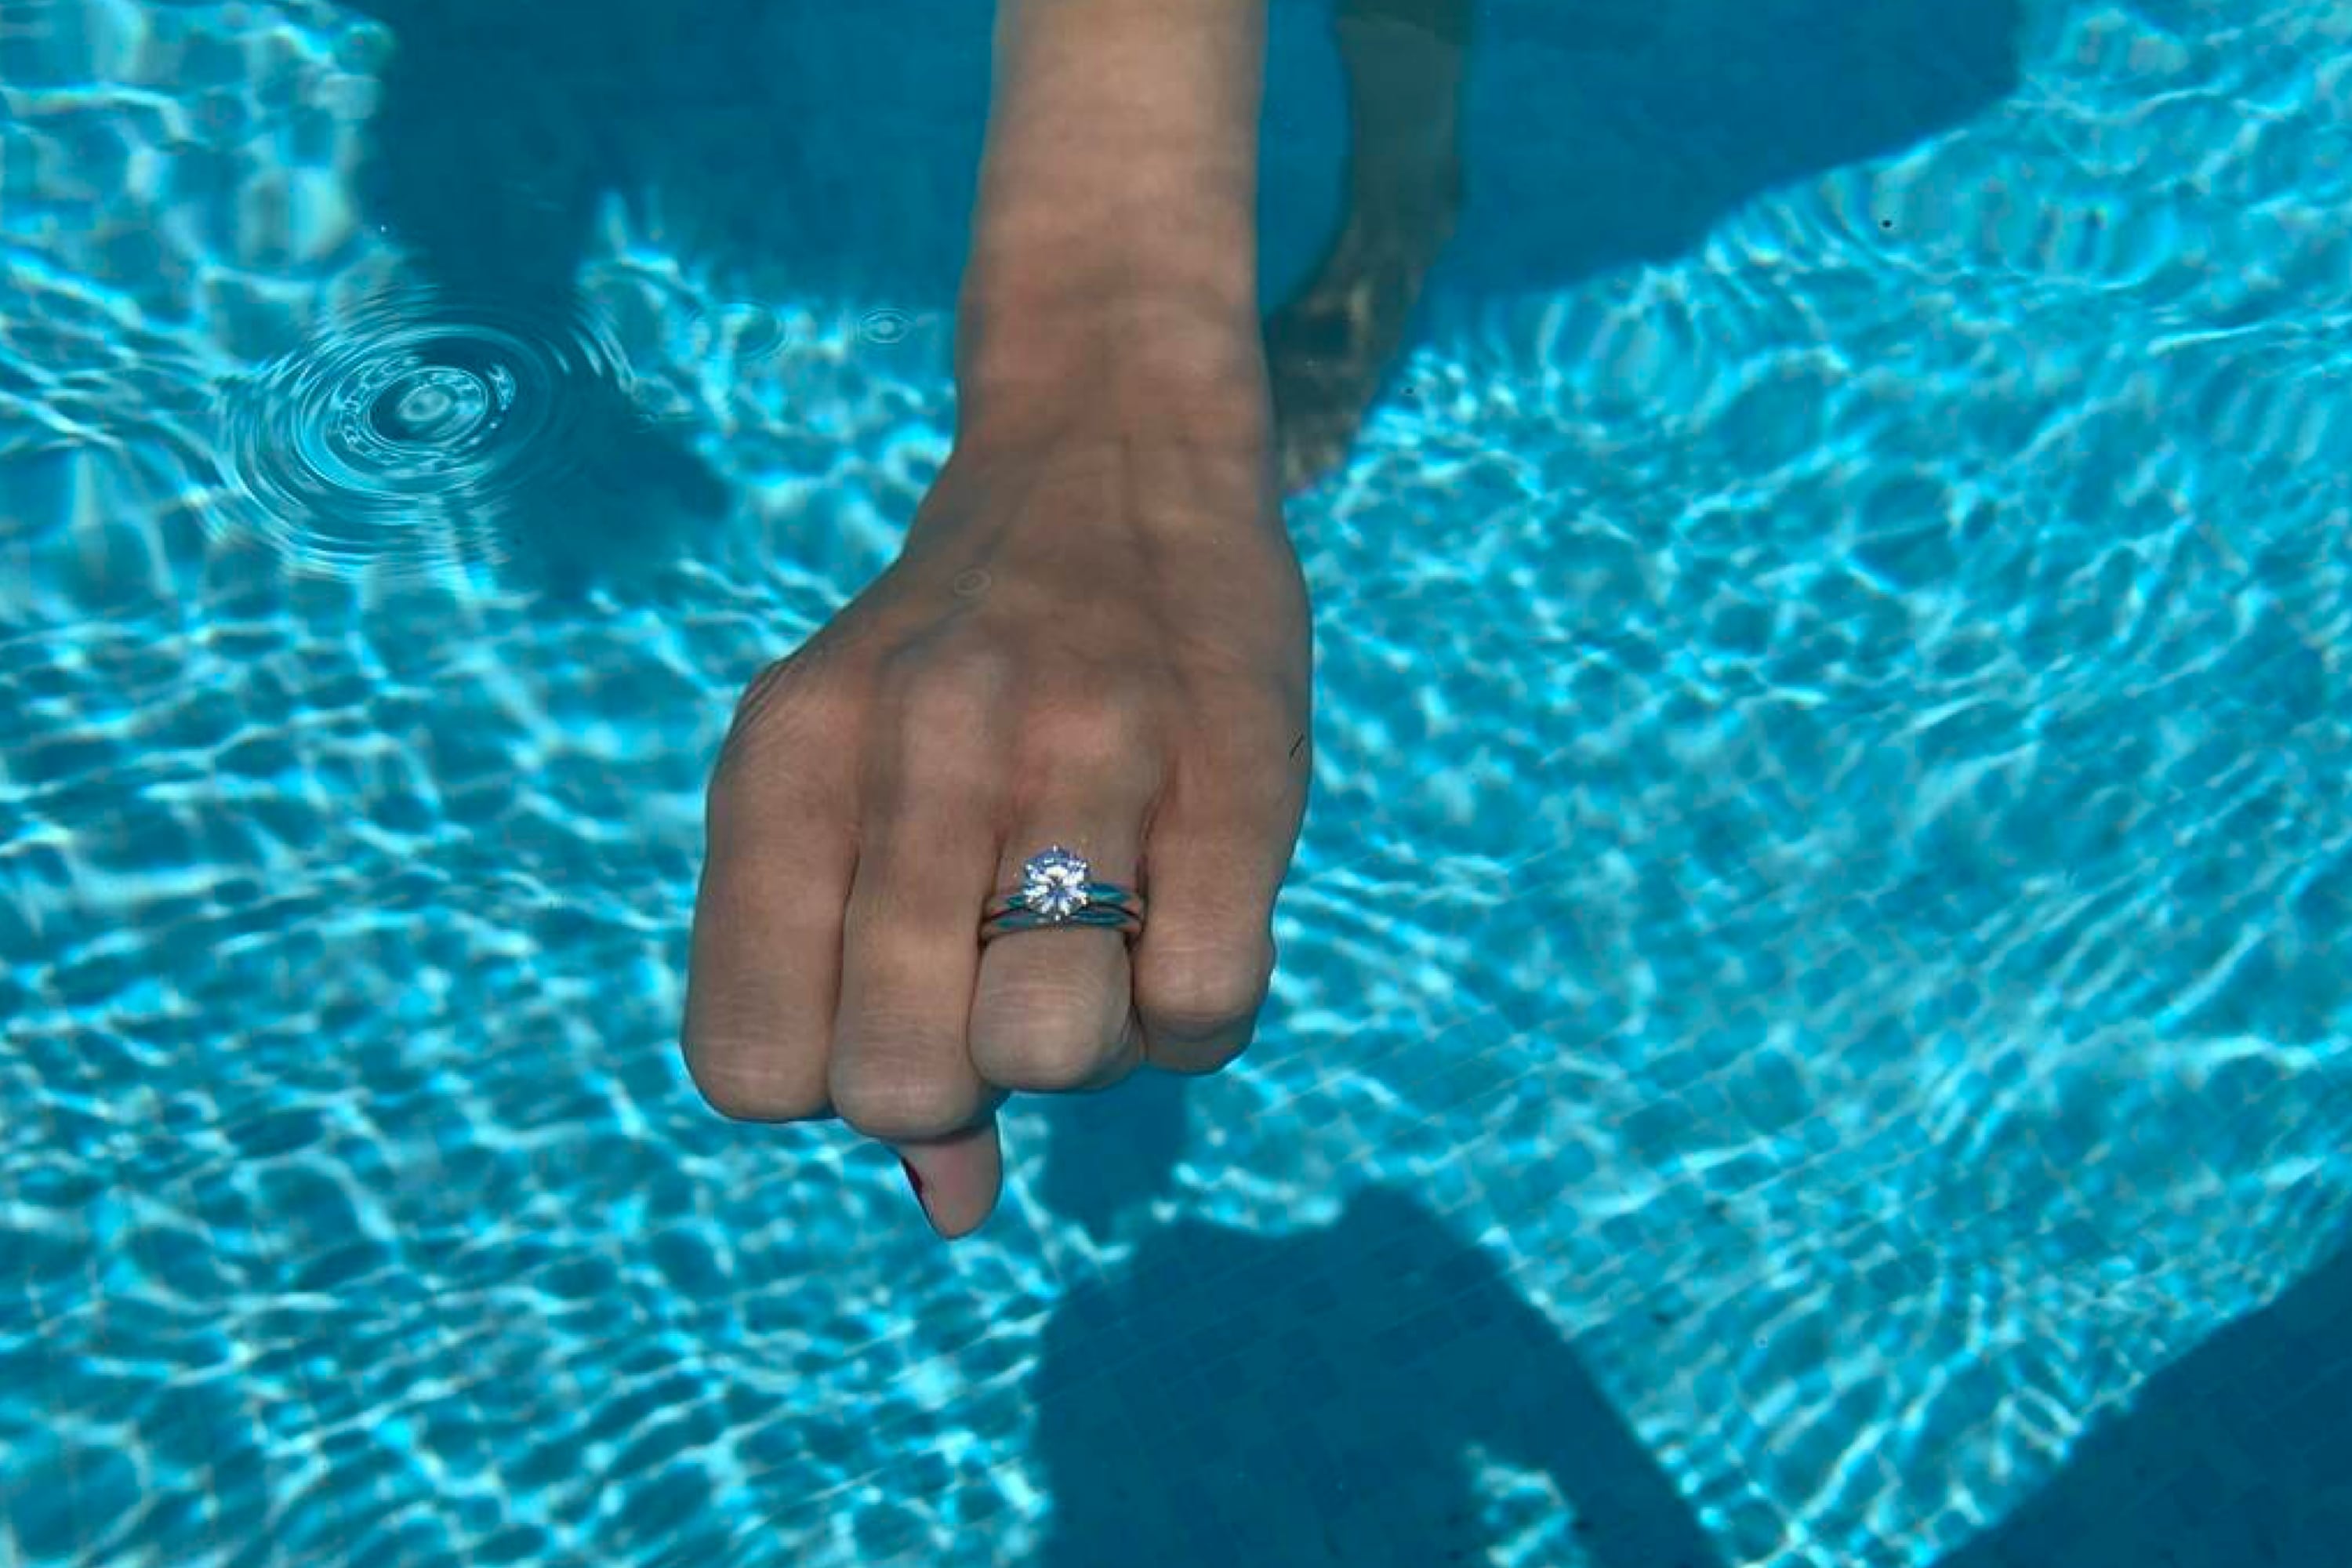 Can I Wear Stainless Steel Jewelry In a Swimming Pool